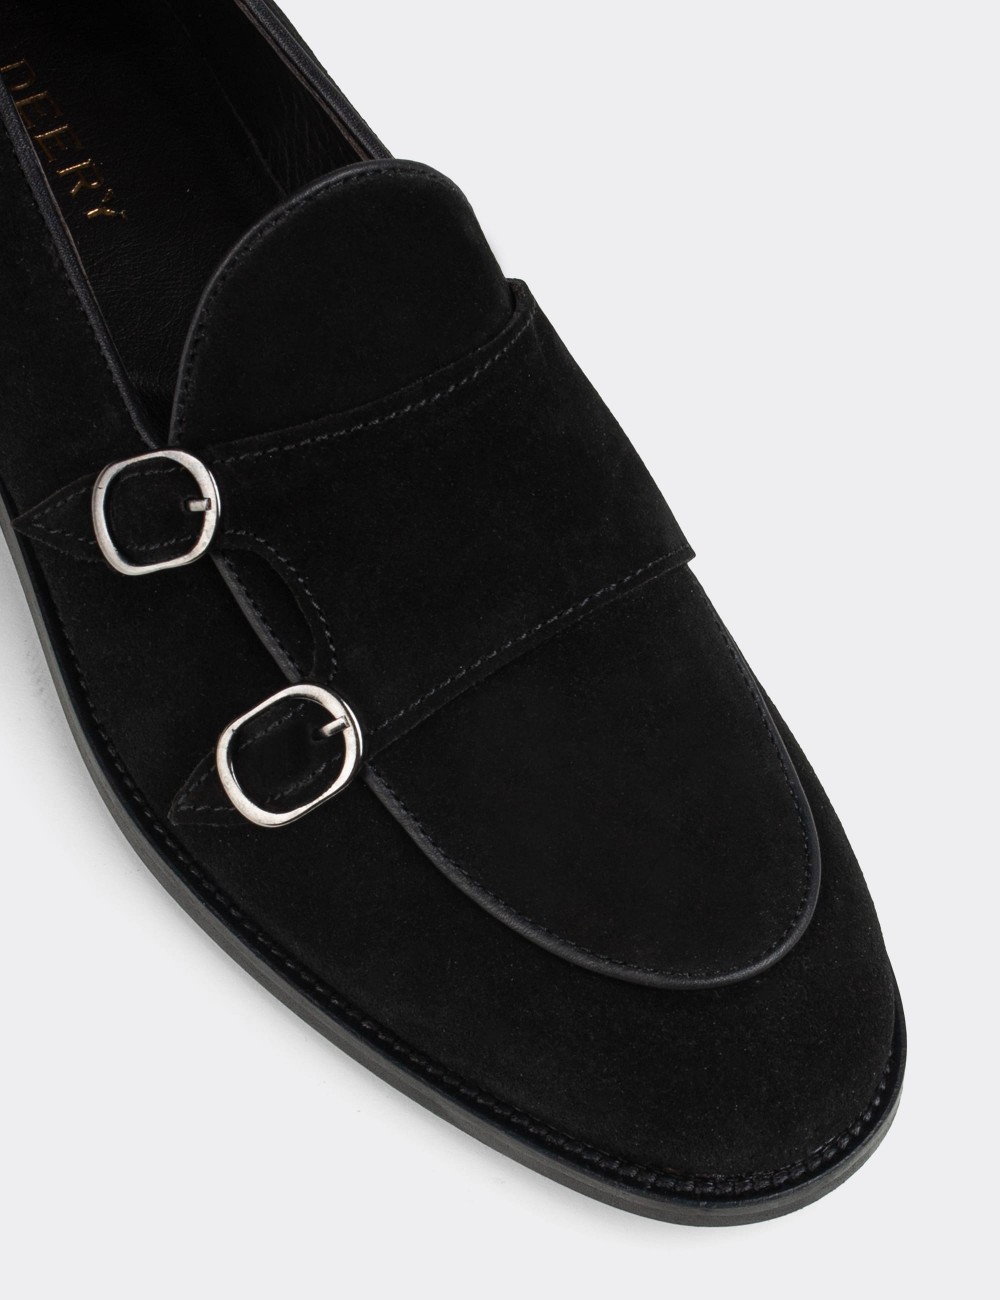 Black Suede Leather Double Monk-Strap Loafers 38 Numara